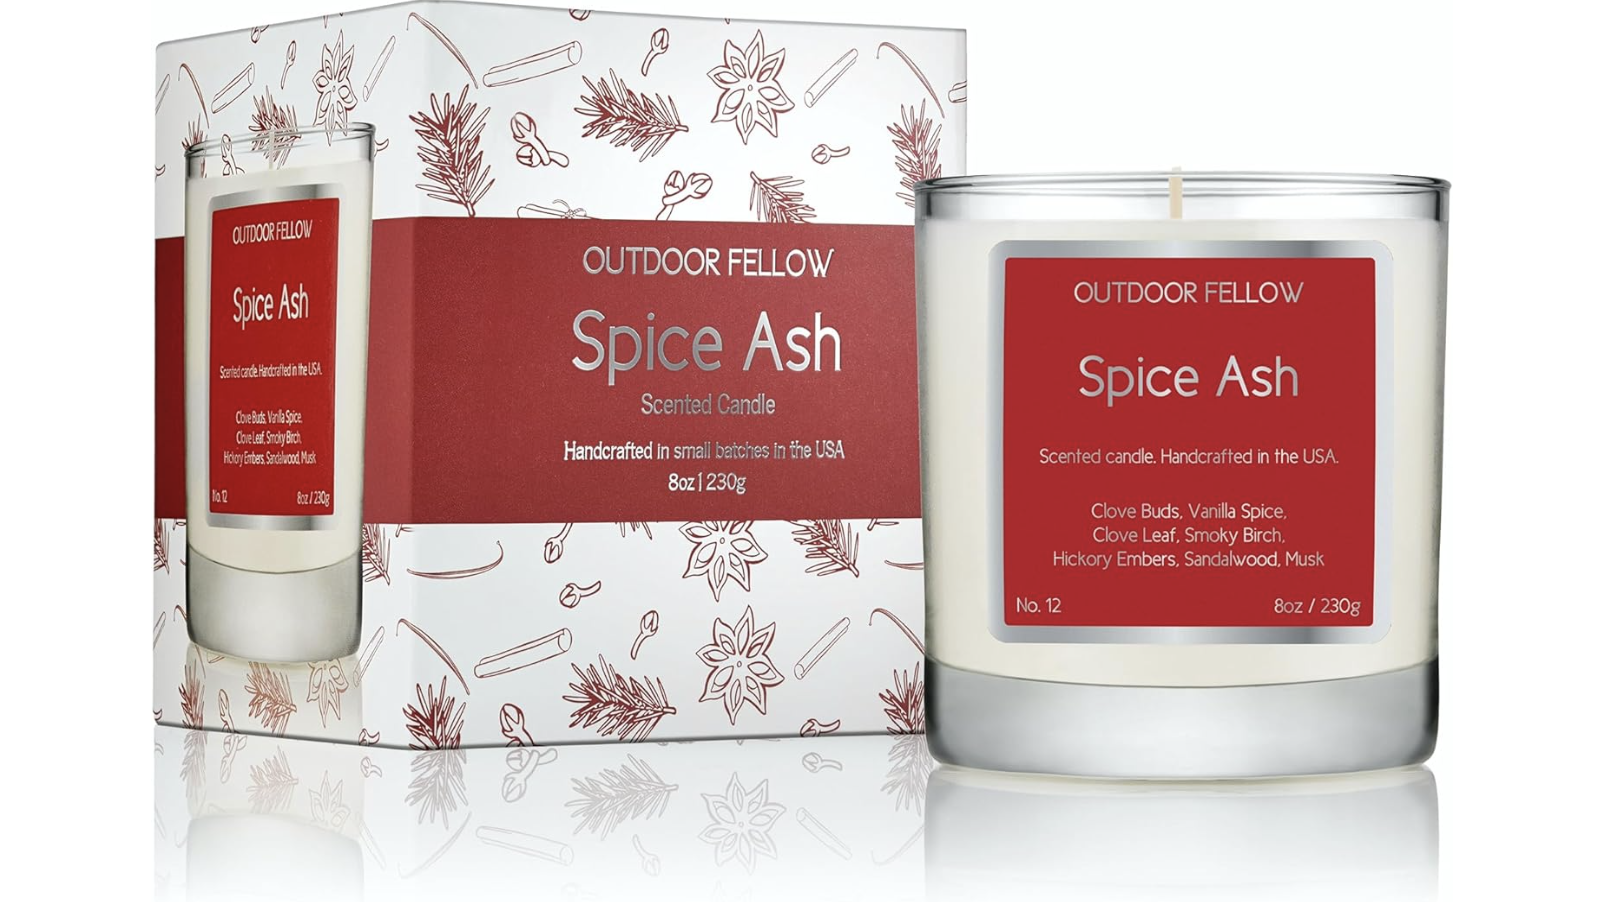 Fall-Stars: The Best Fall Scents